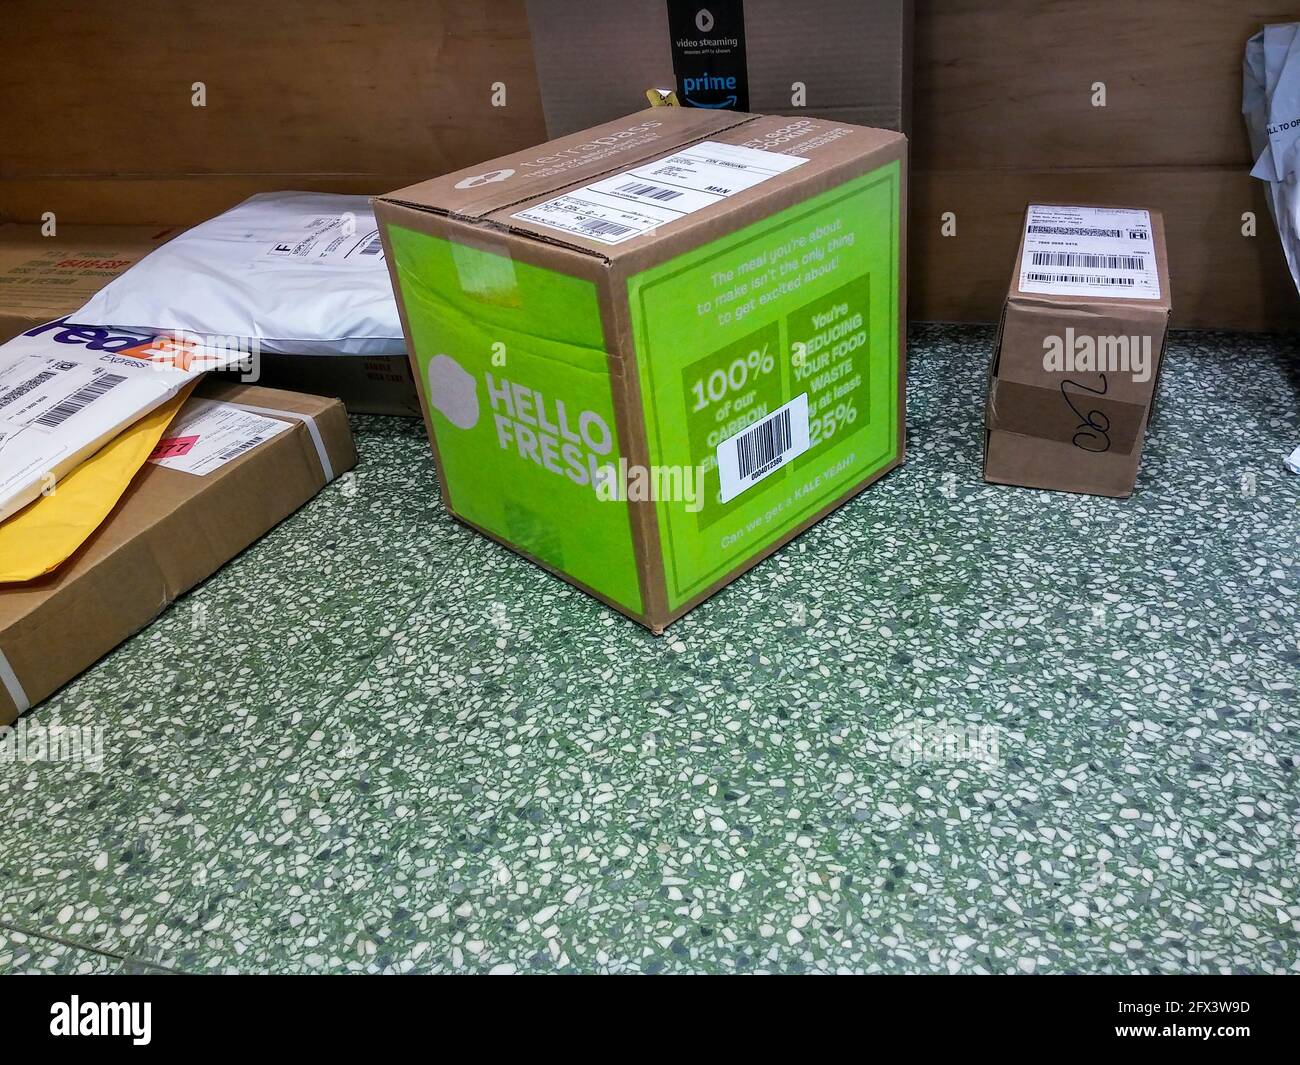 A delivery from the Hello Fresh meal subscription service waits to be picked up in the lobby of an apartment building in New York on Tuesday, May 11, 2021. (Photo by Richard B. Levine) Stock Photo